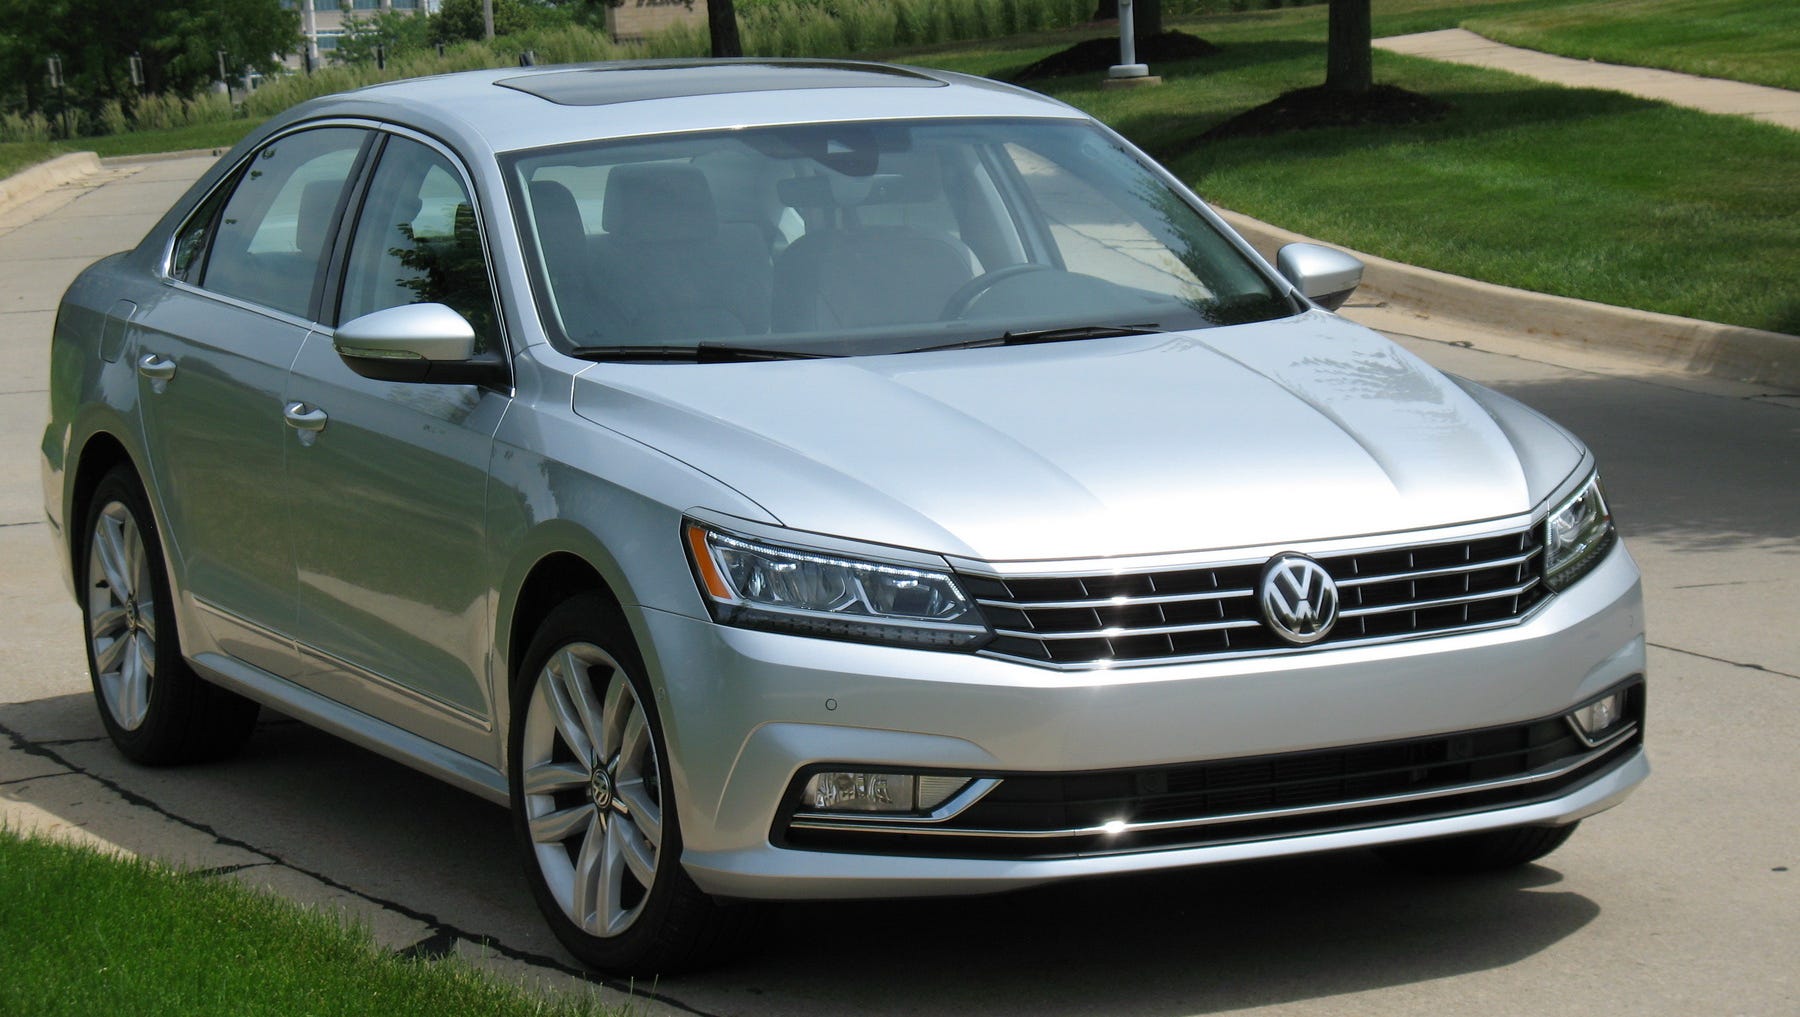 Auto review: 2017 Volkswagen Passat is fast, roomy and economical